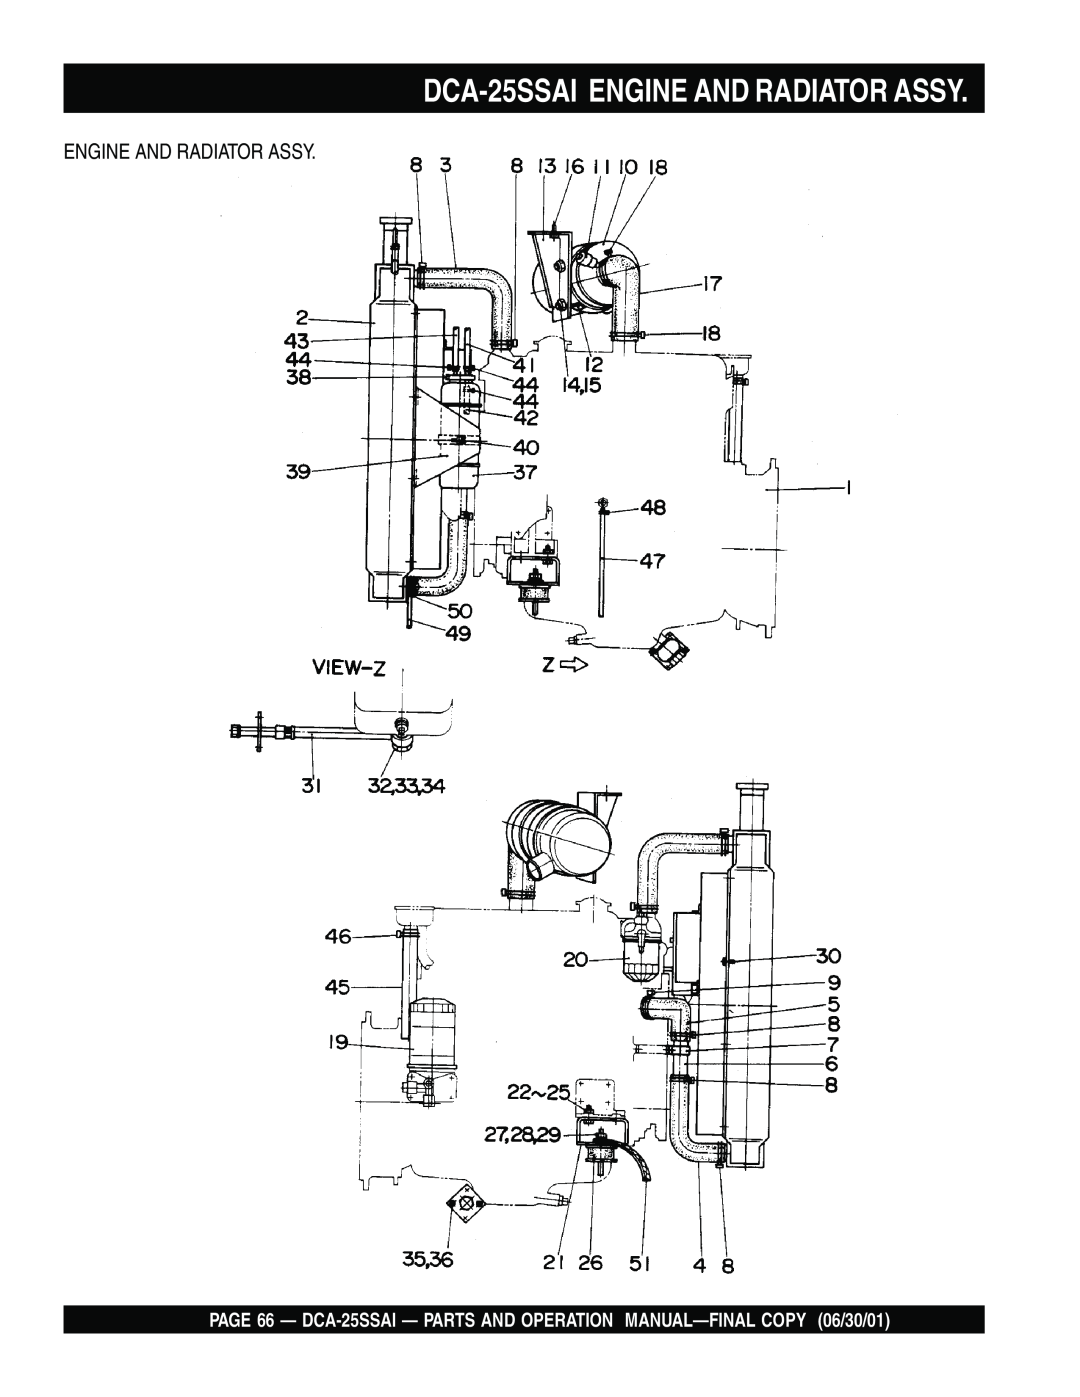 Multiquip operation manual DCA-25SSAI ENGINE AND RADIATOR ASSY, Engine And Radiator Assy 